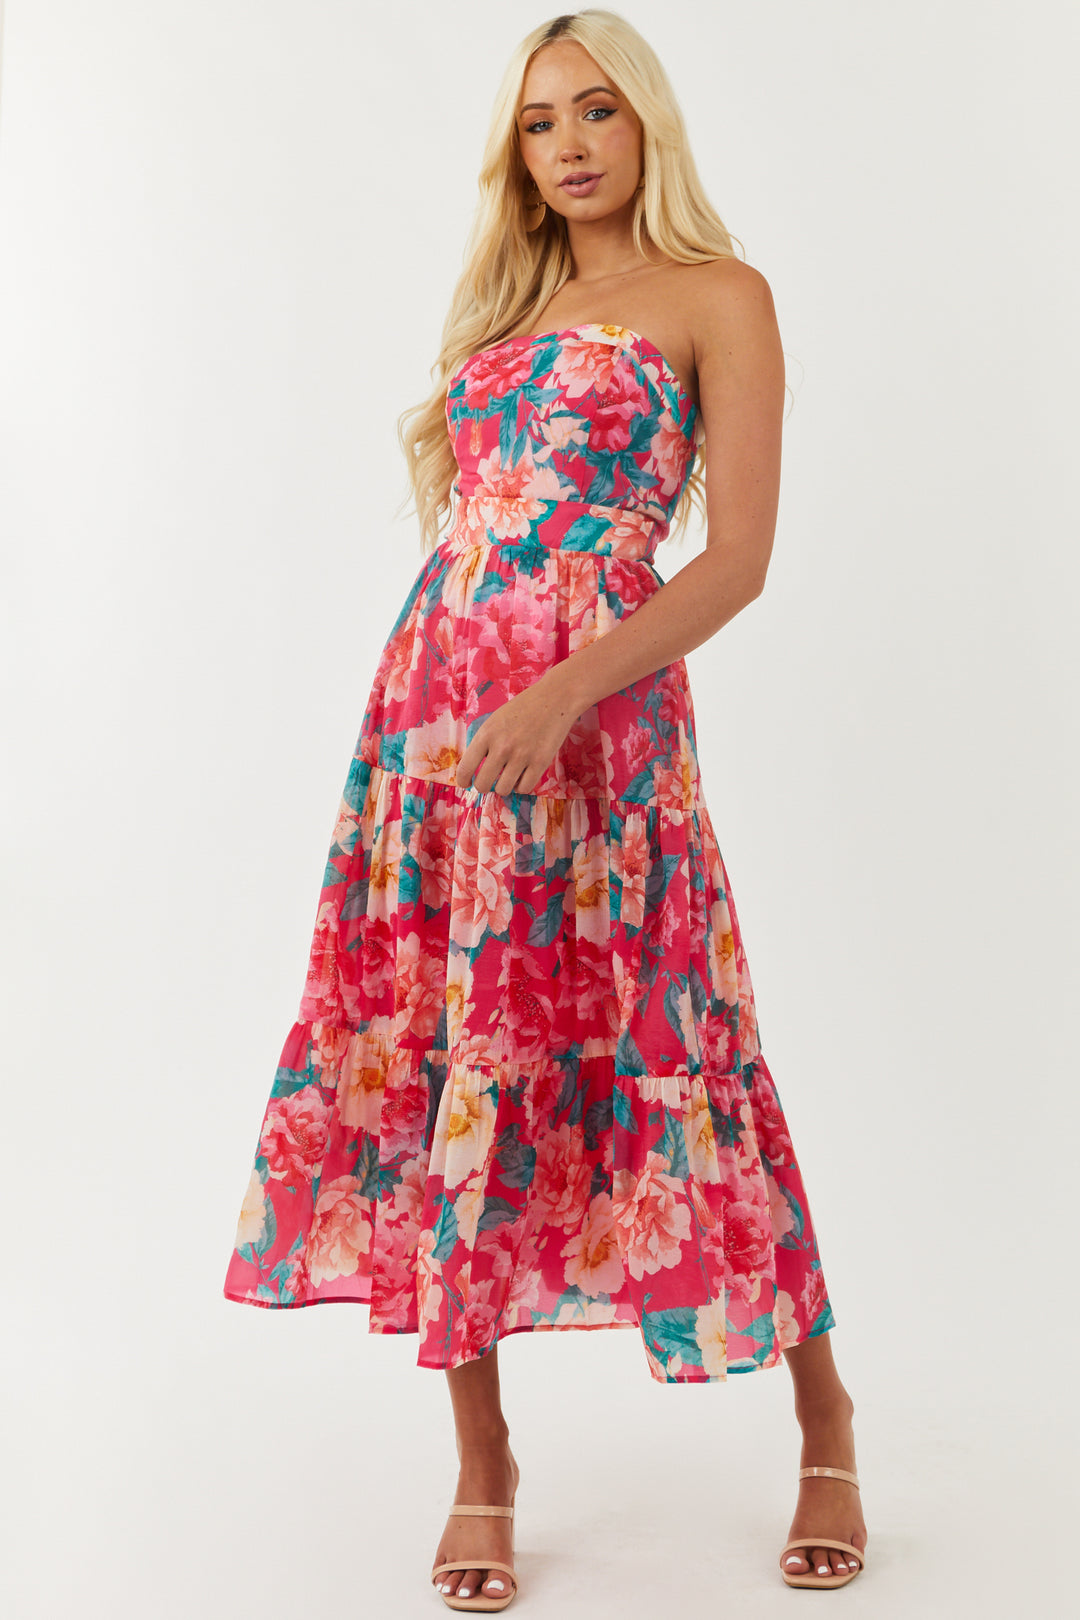 Flying Tomato Hot Pink Floral Print Strapless Tiered Dress & Lime Lush